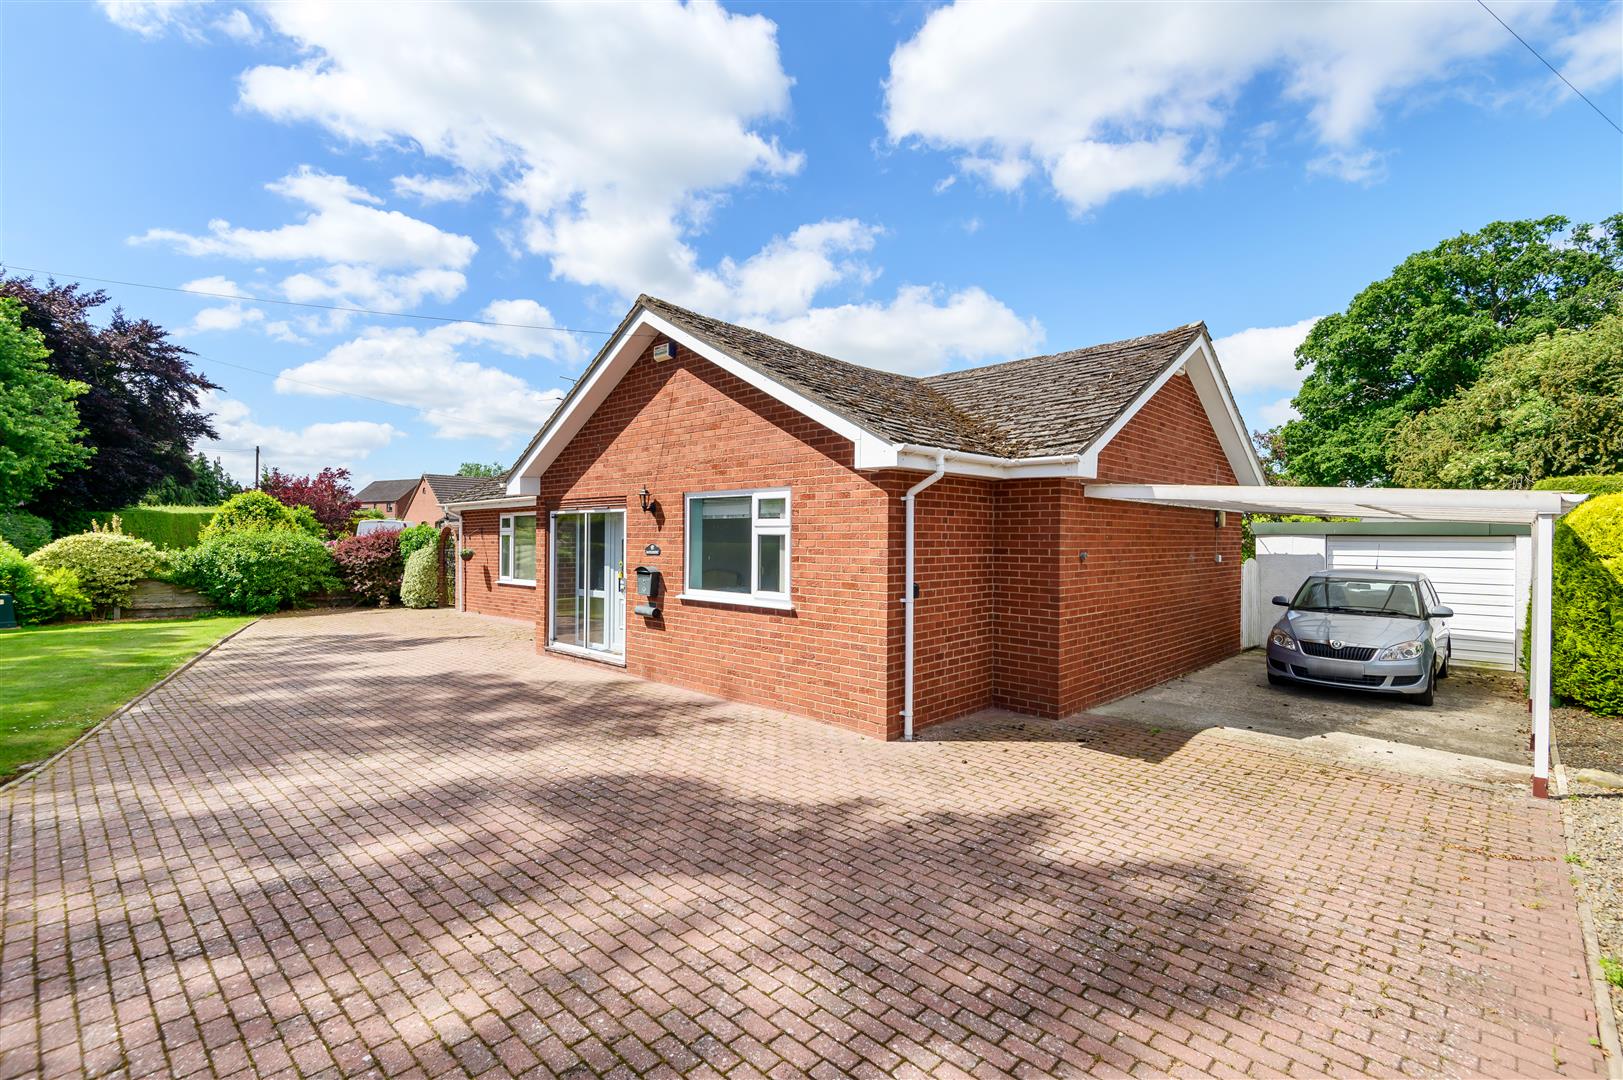 3 bed detached bungalow for sale in Brimfield, SY8